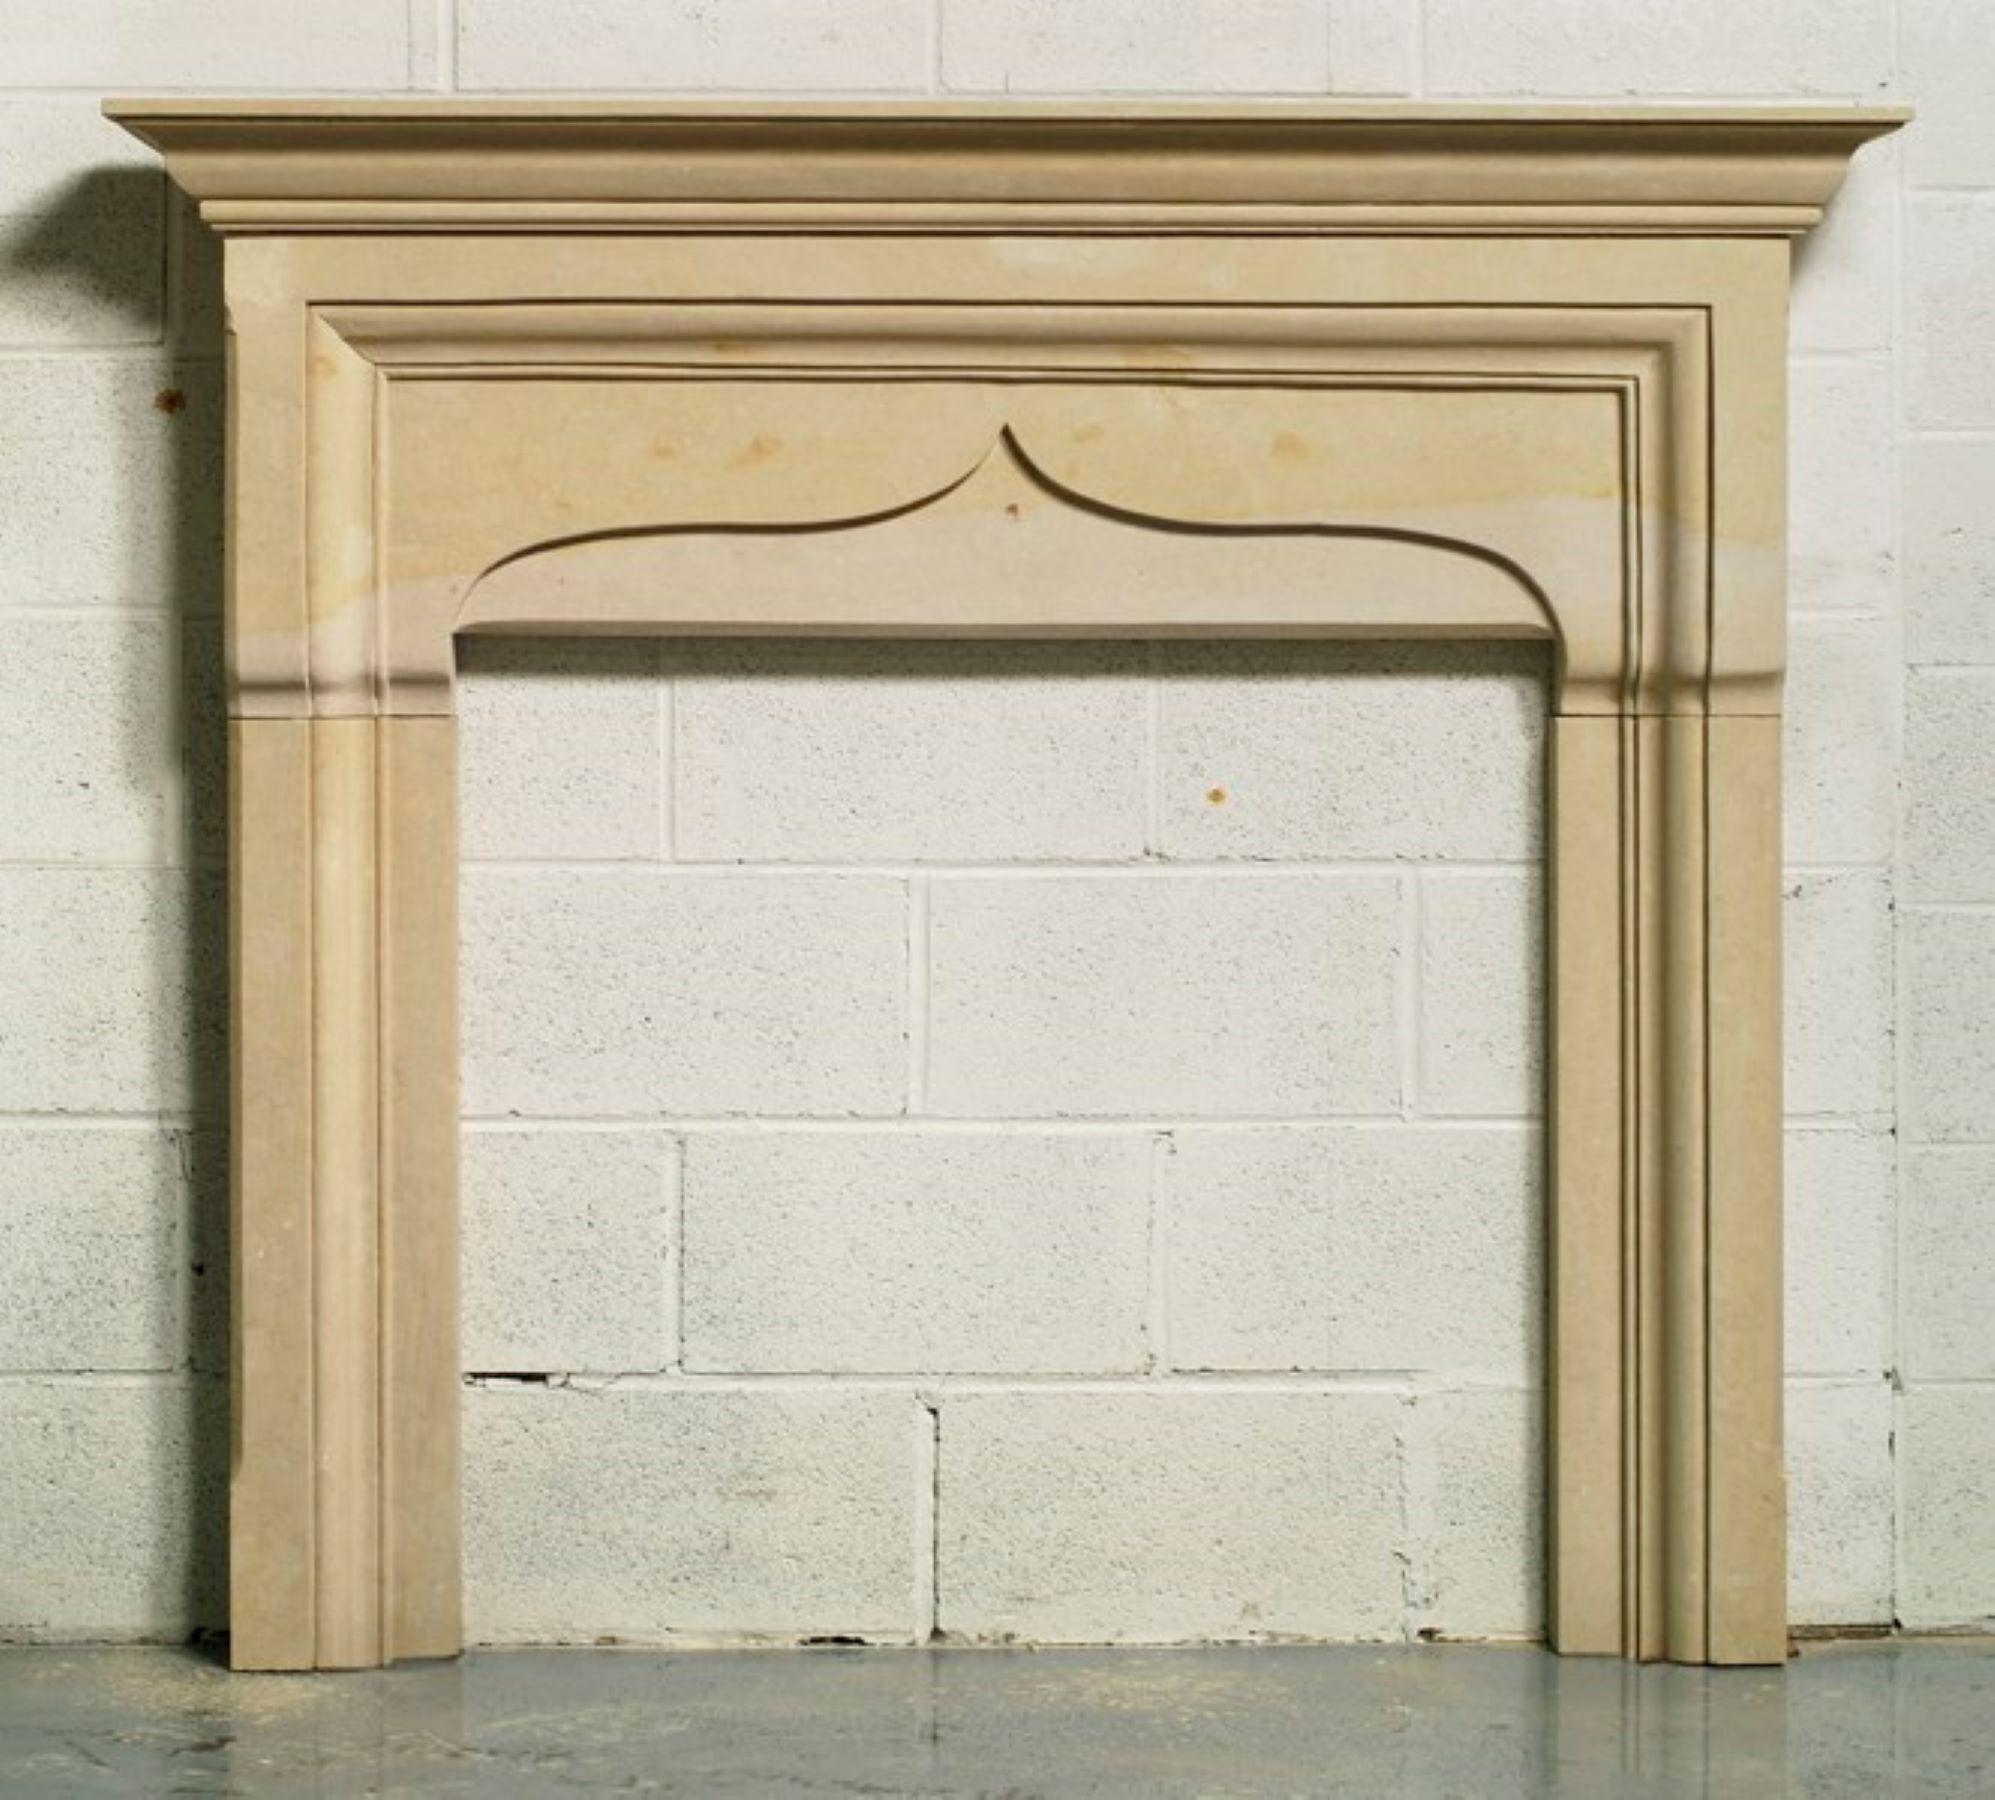 Similar to our Tudor and Stuart fireplace designs, the Gothic stone fireplace features the traditional peaked arch, evoking the classic 16th century Tudor era, but greatly simplifies the lintel to give it a more modern feel. Unlike The Stuart, or